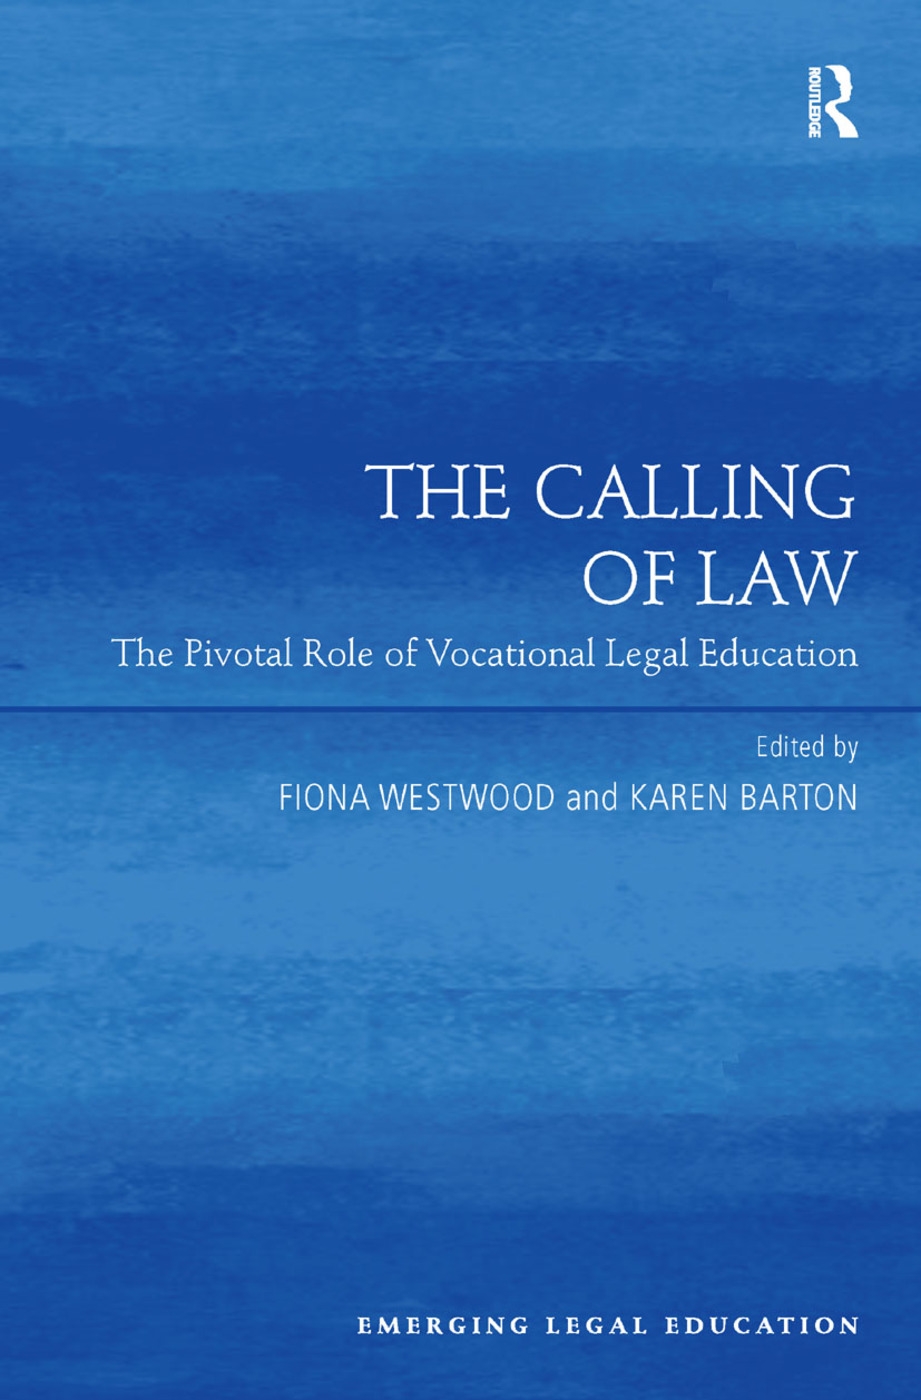 The Calling of Law: The Pivotal Role of Vocational Legal Education. Edited by Fiona Westwood, Karen Barton